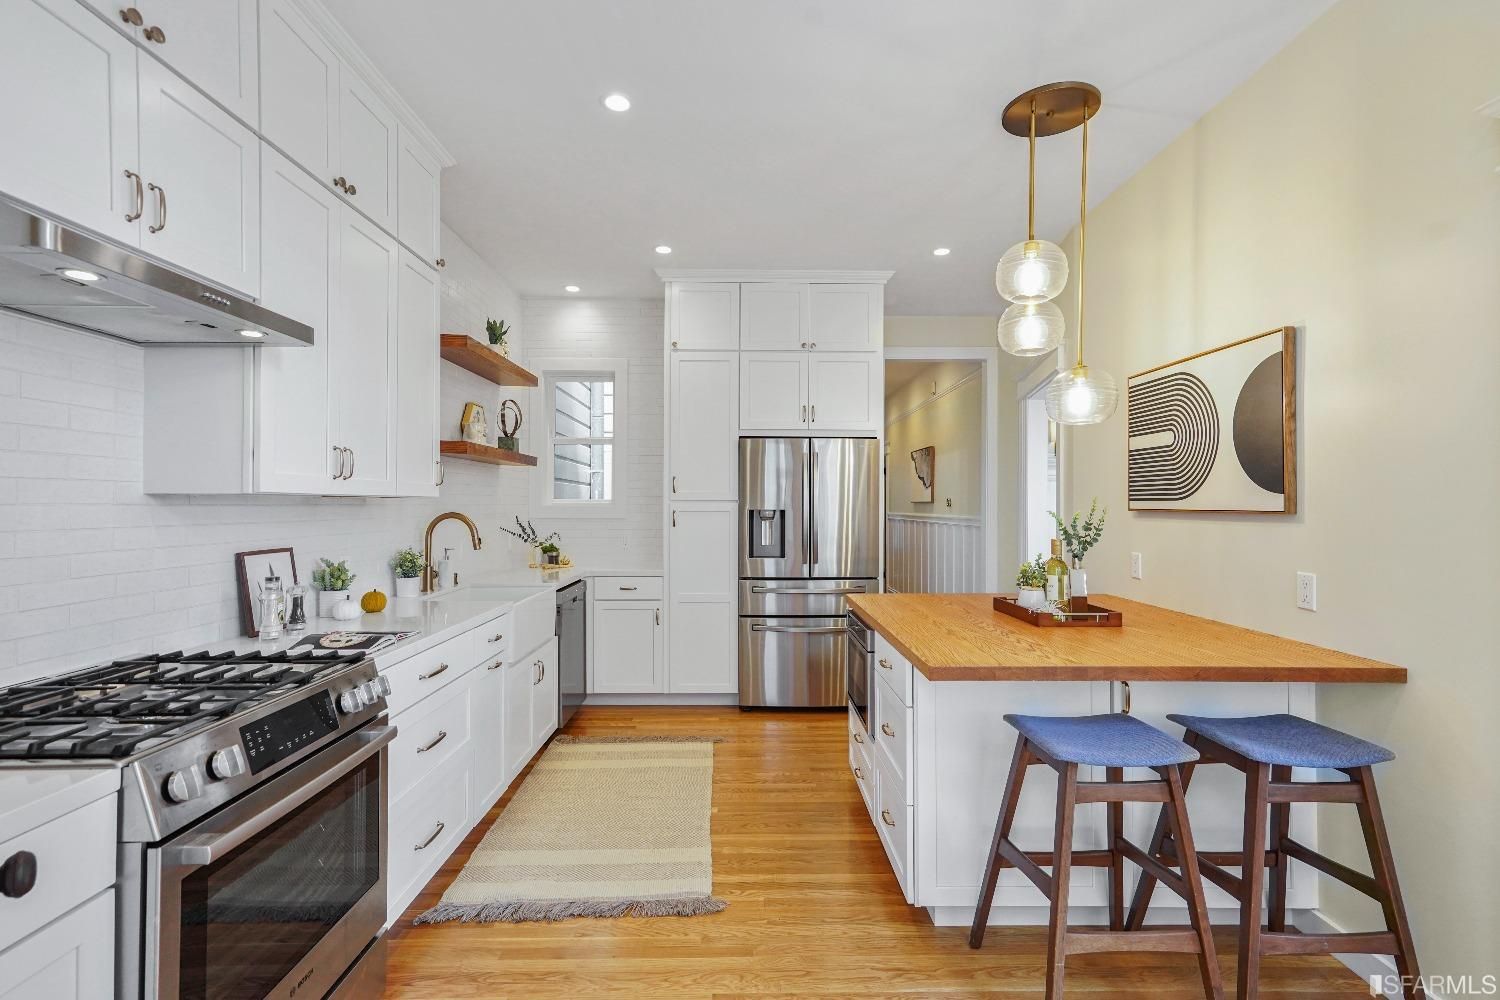 Property Photo: Kitchen featuring white cabinetry, lux stove, and modern lighting